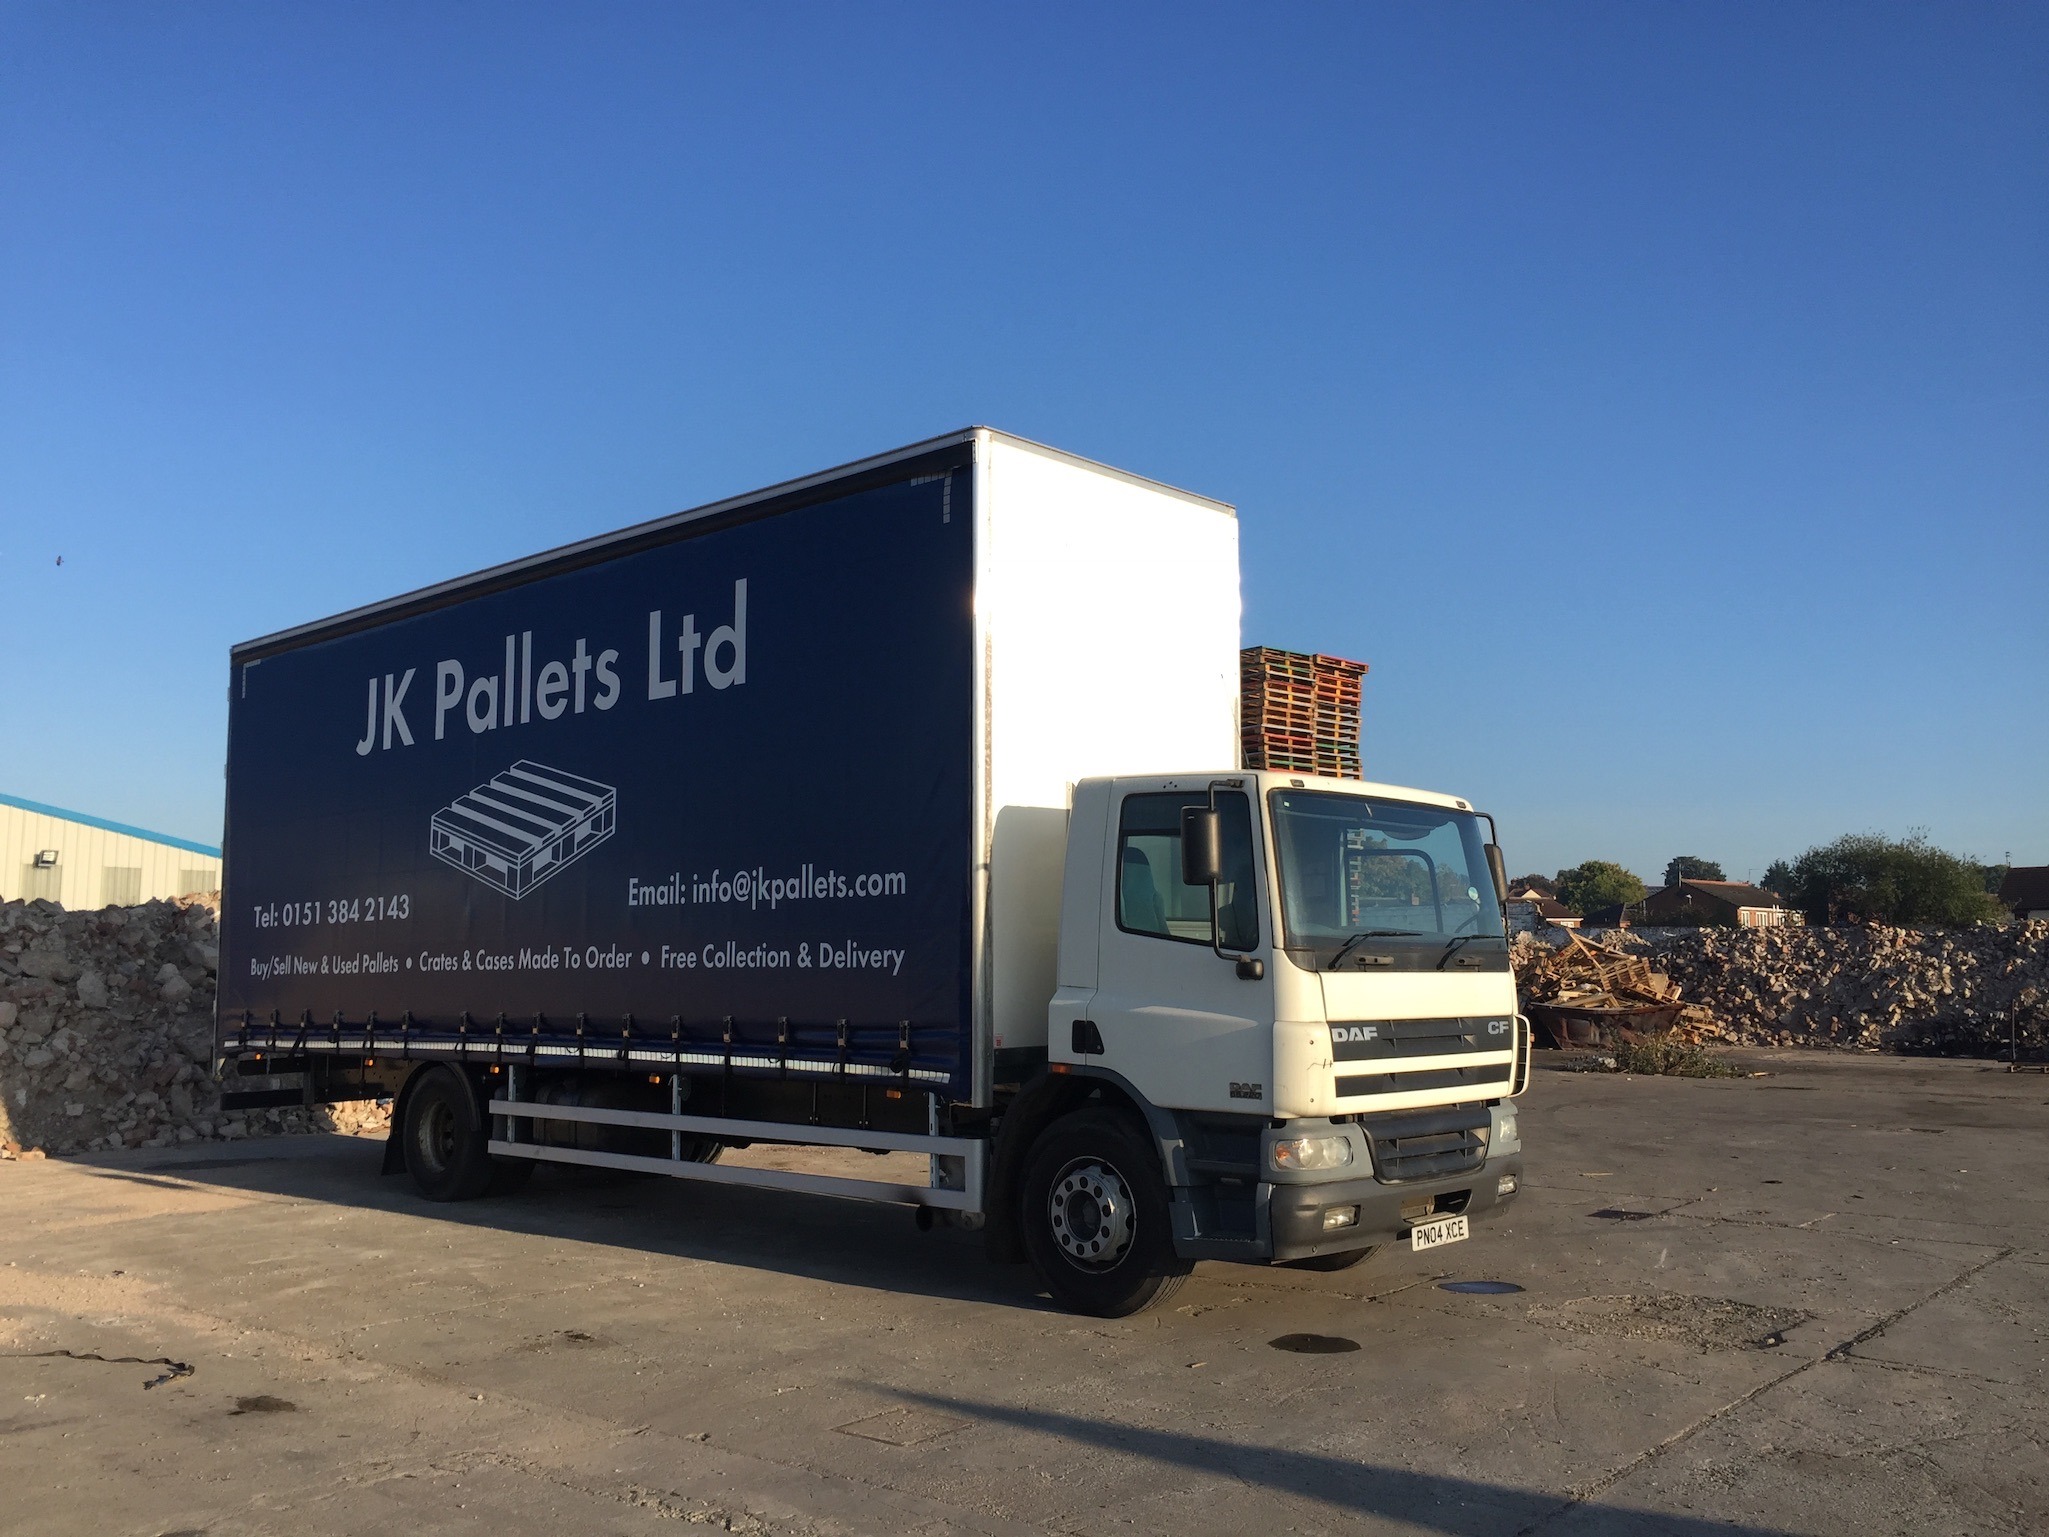 JK Pallets fleet of lorries can deliver anywhere in the UK